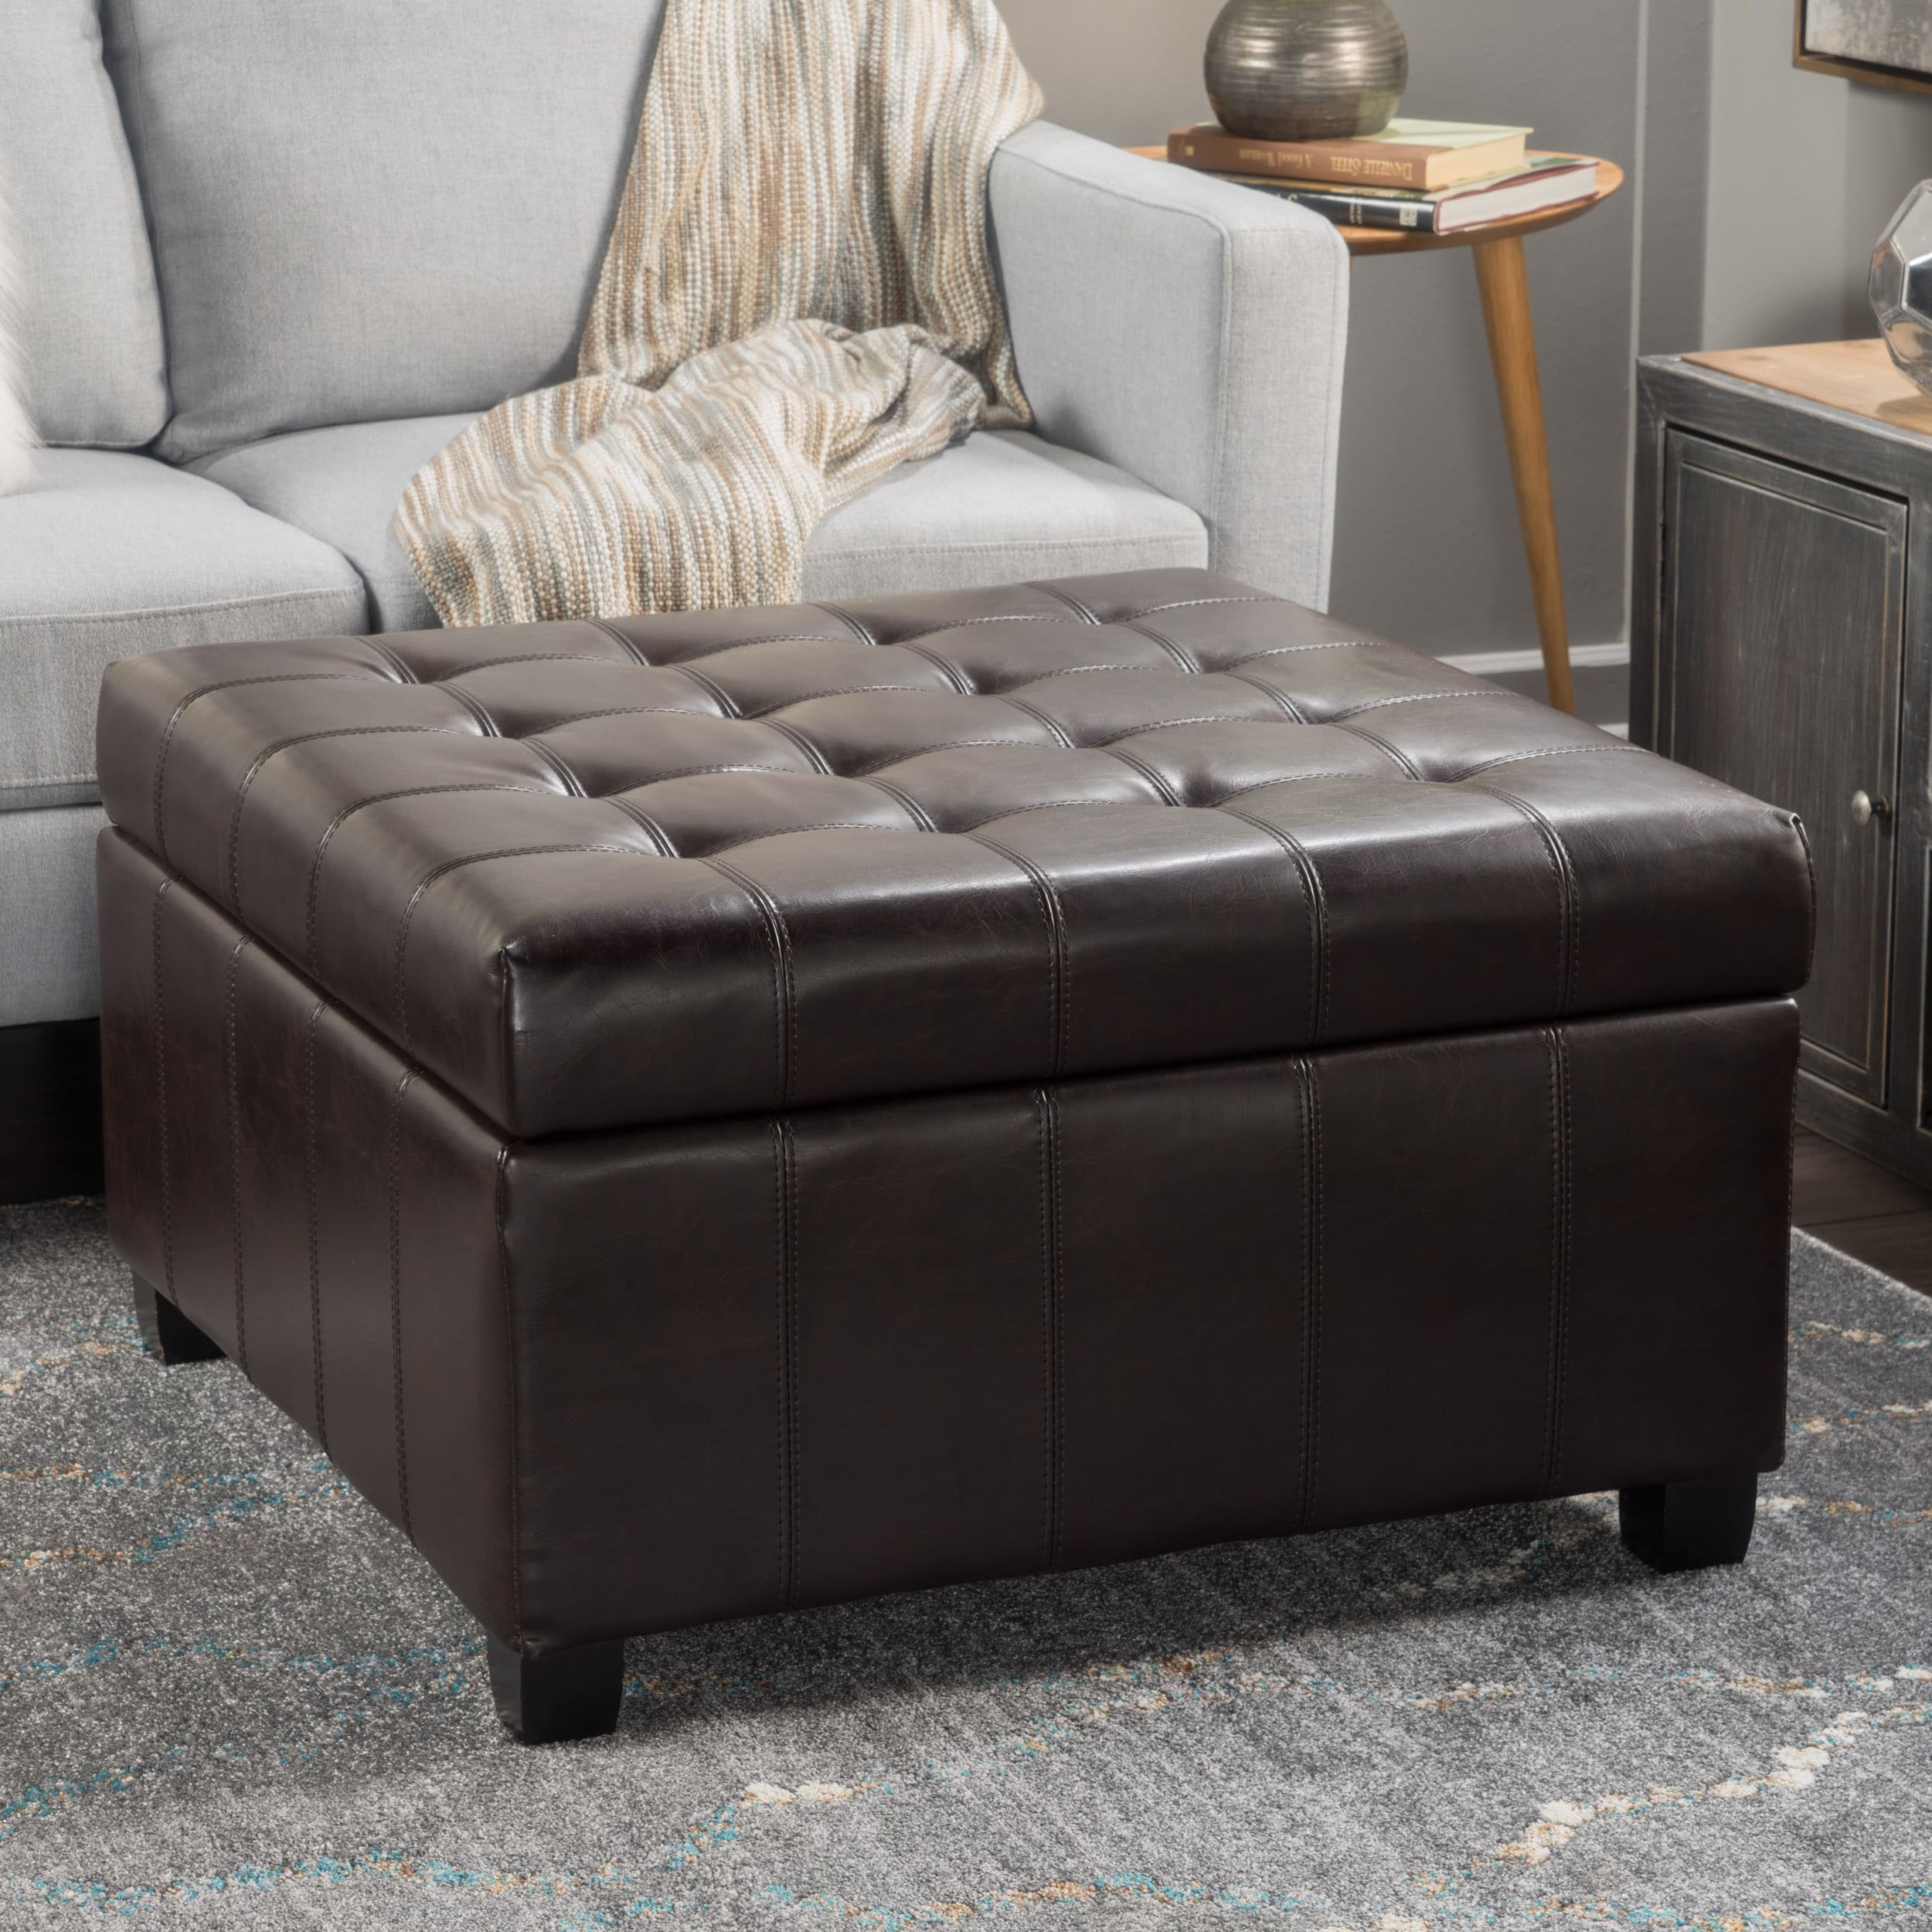 Alexandria Contemporary Tufted Bonded Leather Storage Ottoman by Christopher Knight Home